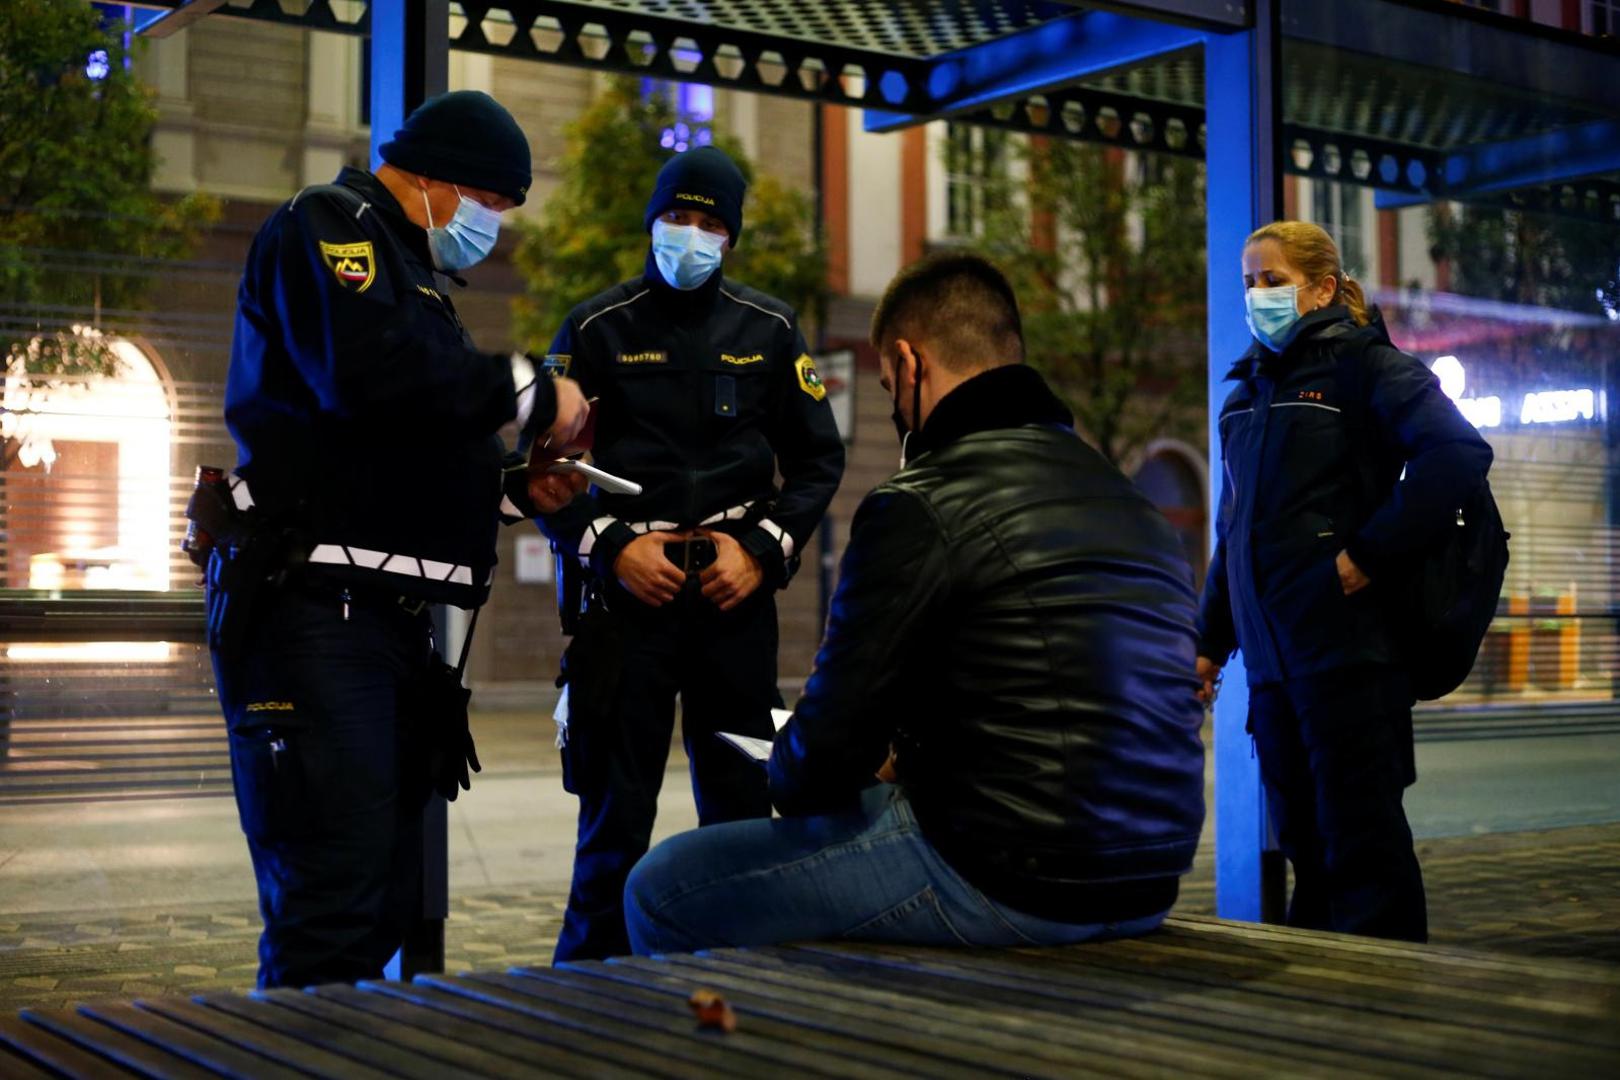 Slovenia starts a nightly curfew from 9 p.m. to 6 a.m as to curb the rising of the coronavirus disease (COVID-19) cases in the country, in Ljubljana Police officers check the documents of a man as Slovenia starts a nightly curfew from 9 p.m. to 6 a.m as part of a state of emergency called to curb the rising of the coronavirus disease (COVID-19) cases in the country, in Ljubljana, Slovenia, October 20, 2020. REUTERS/Borut Zivulovic BORUT ZIVULOVIC